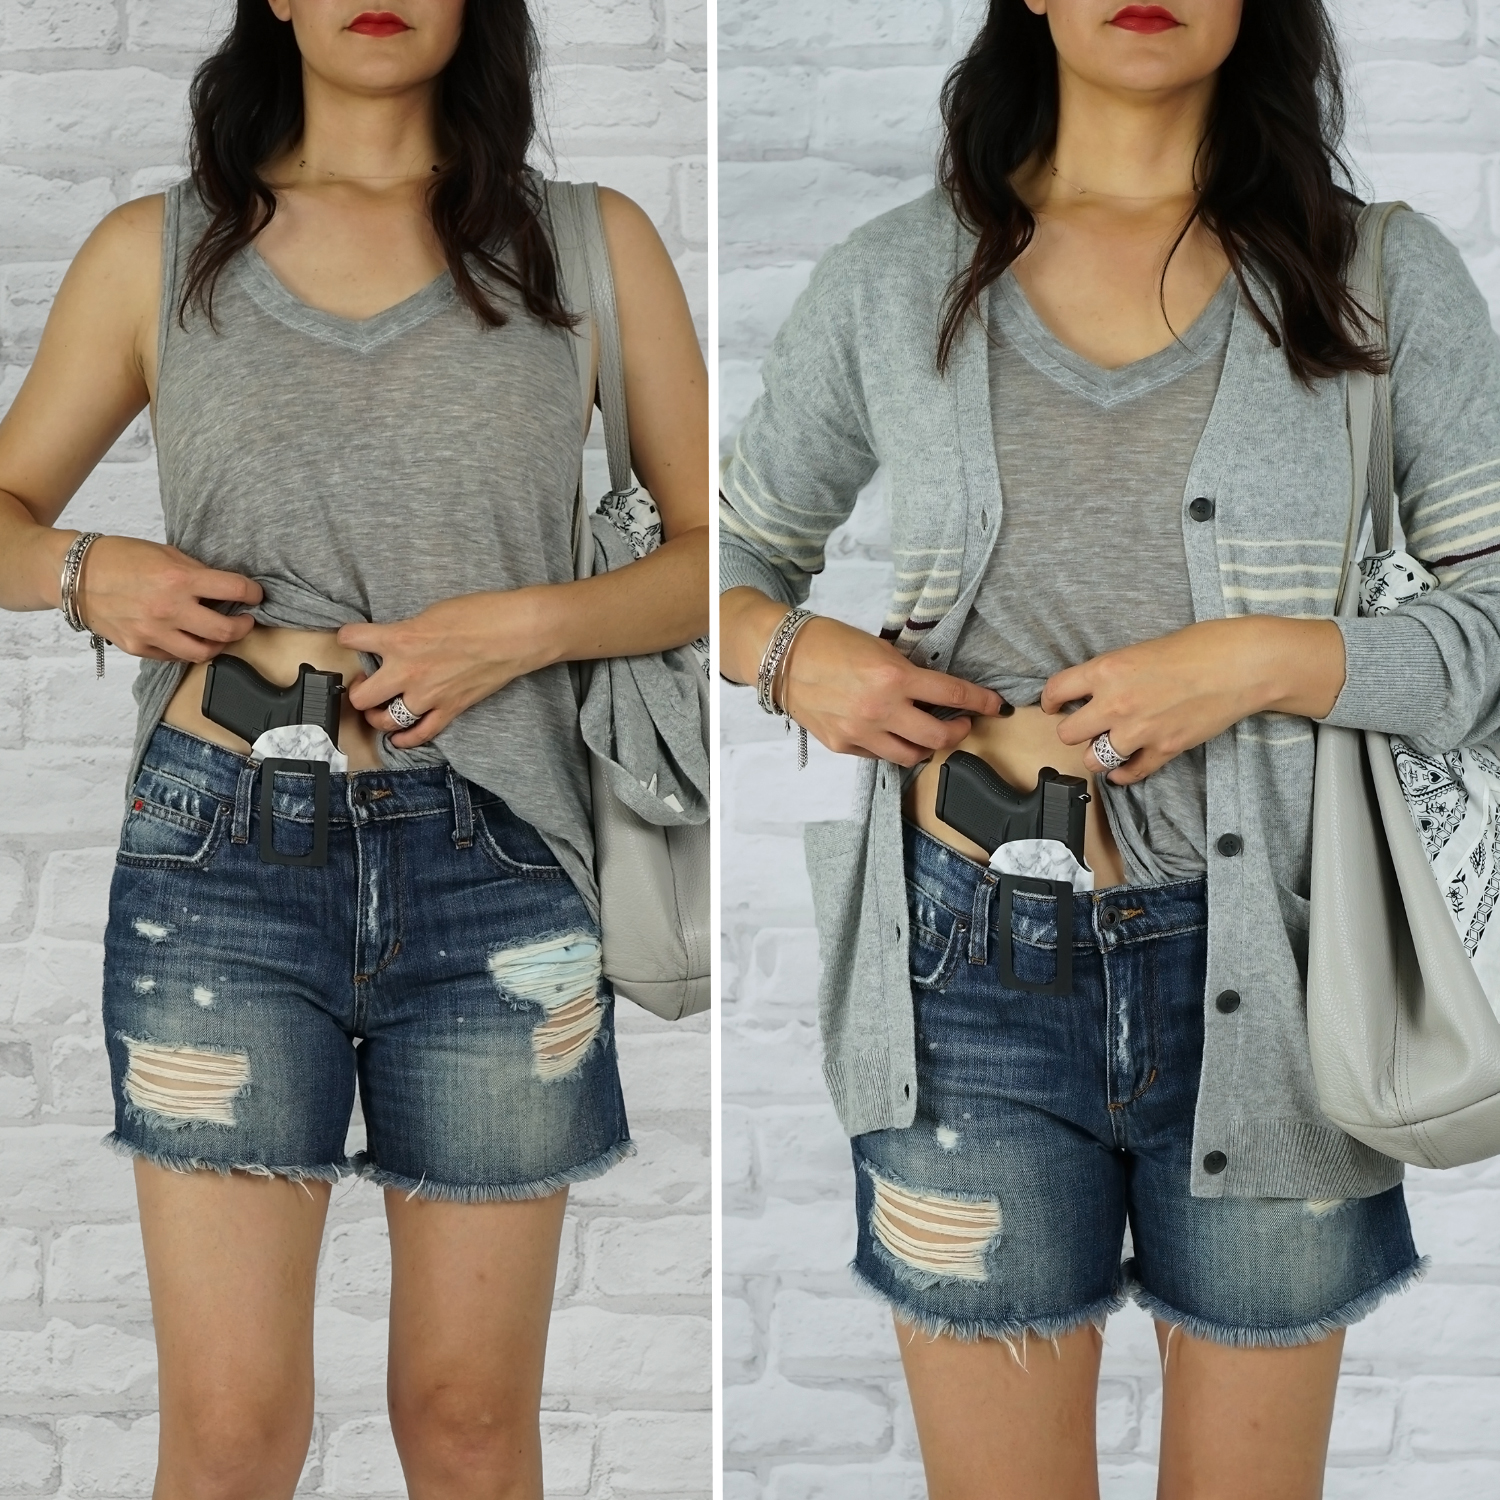 Best Tips for Summer Concealed Carry - Outfit Style Guides for Women